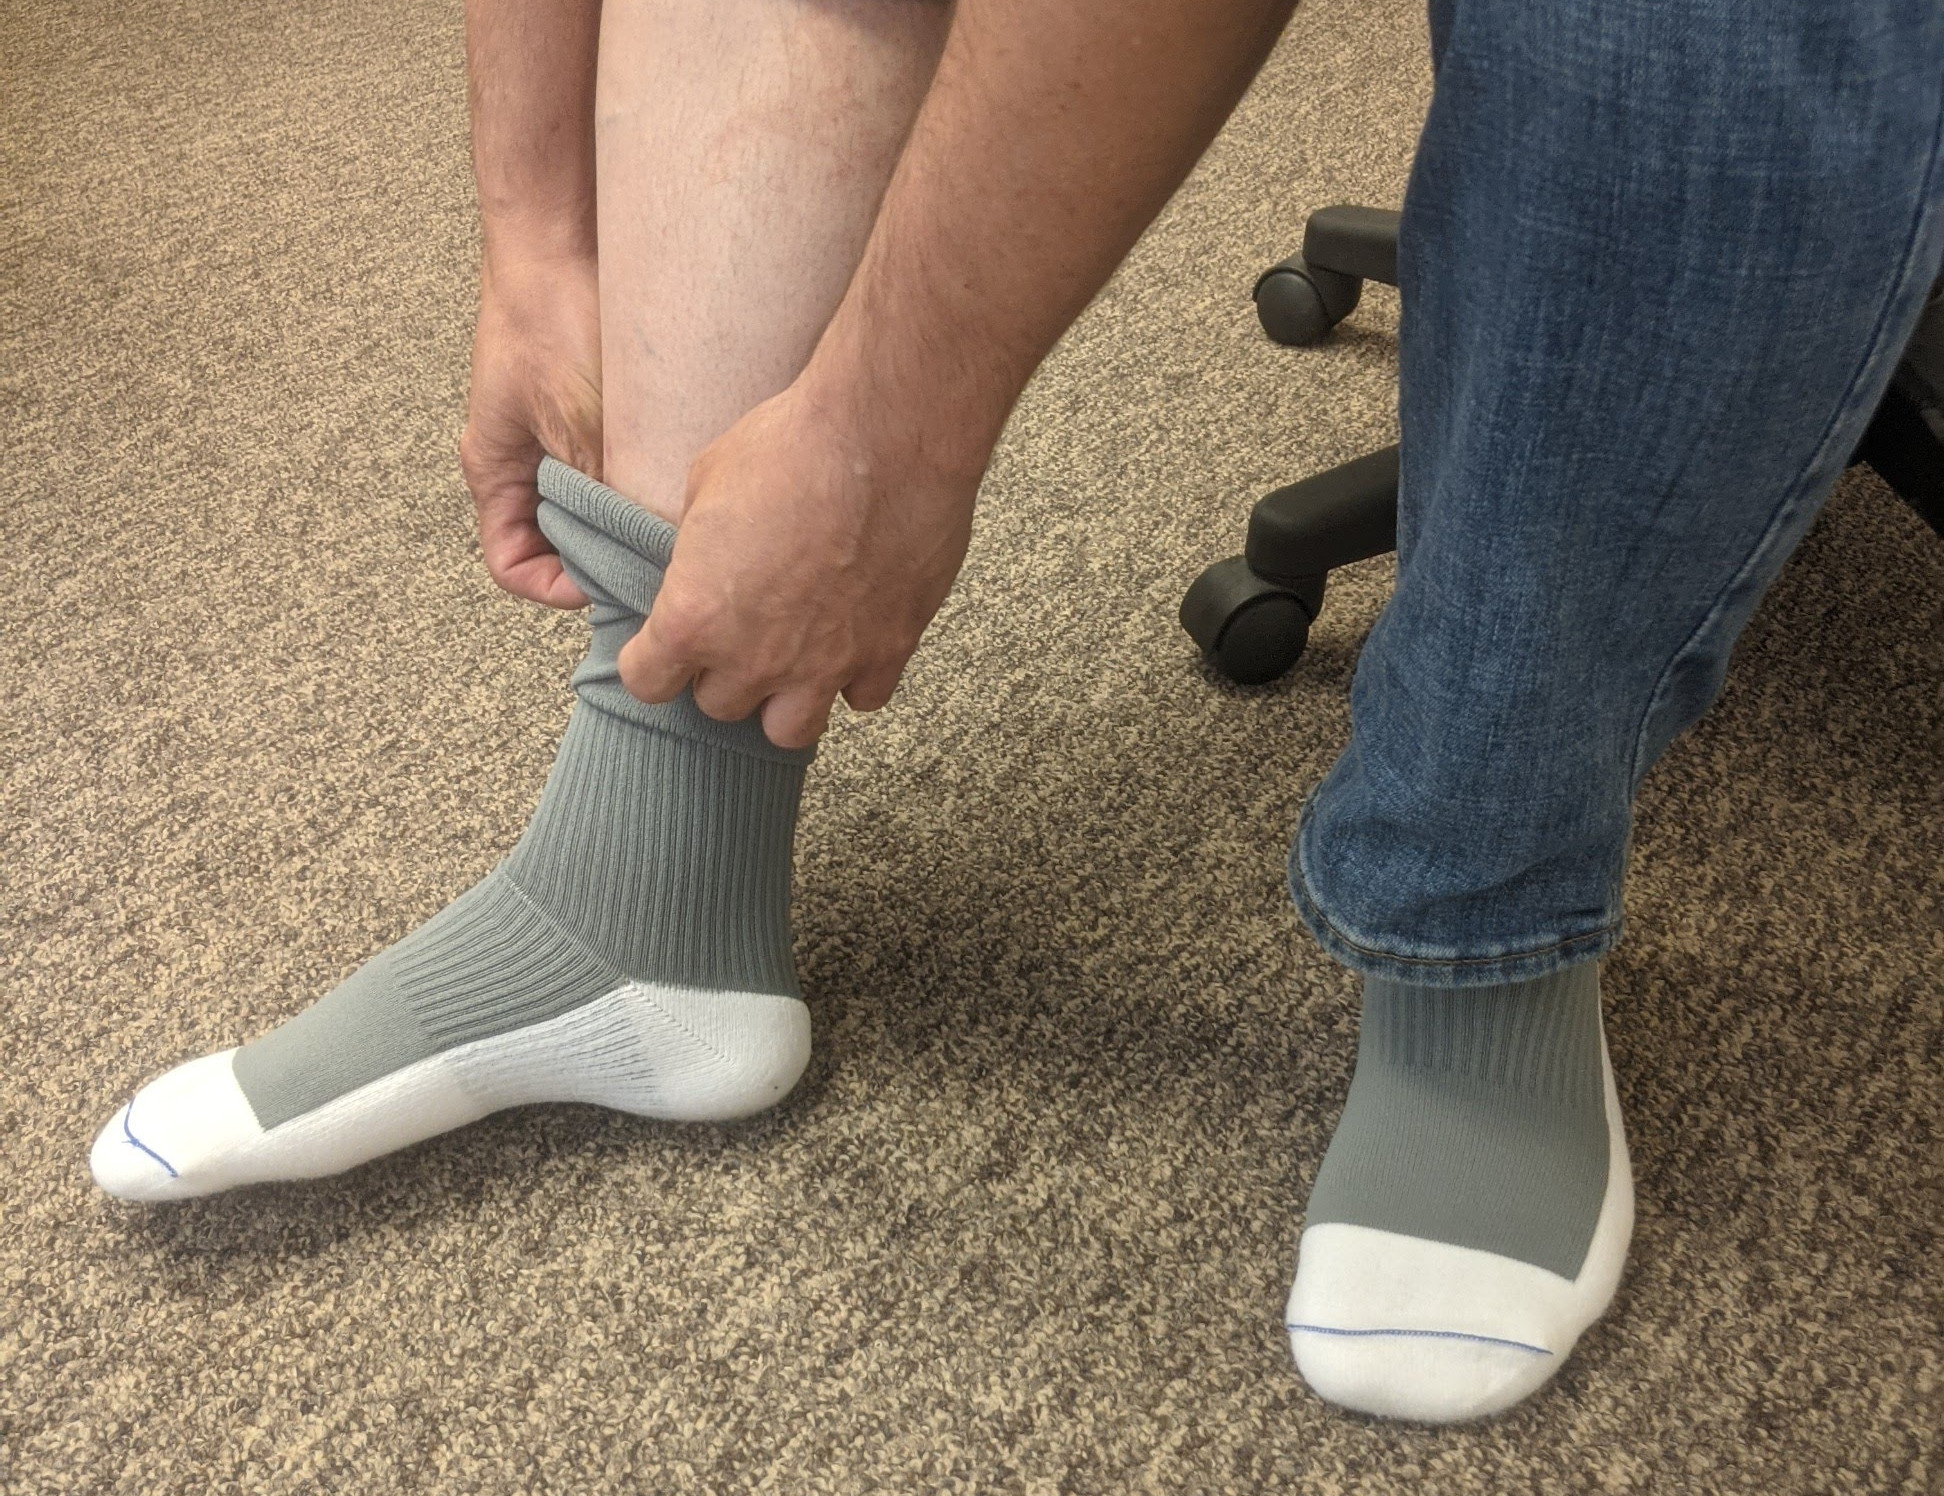 Compression garments that do not compress the foot and heel area